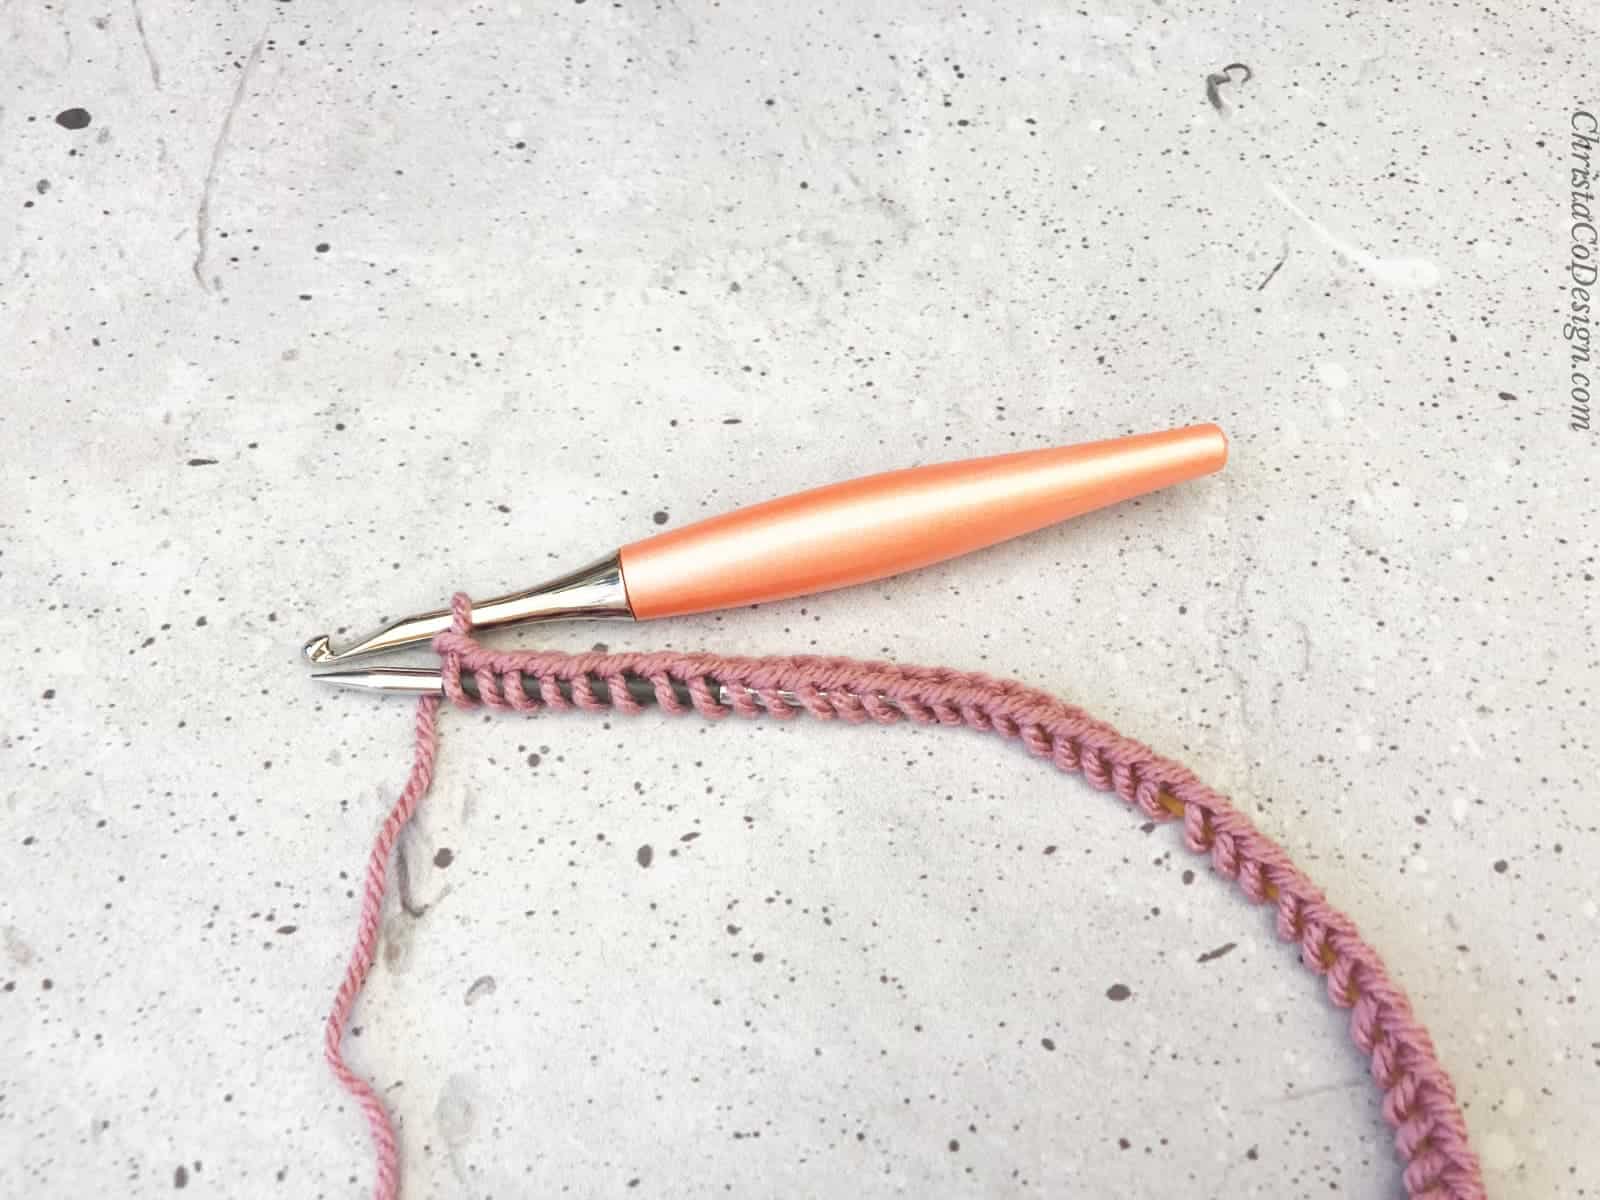 Knitting Cast On With A Crochet Hook